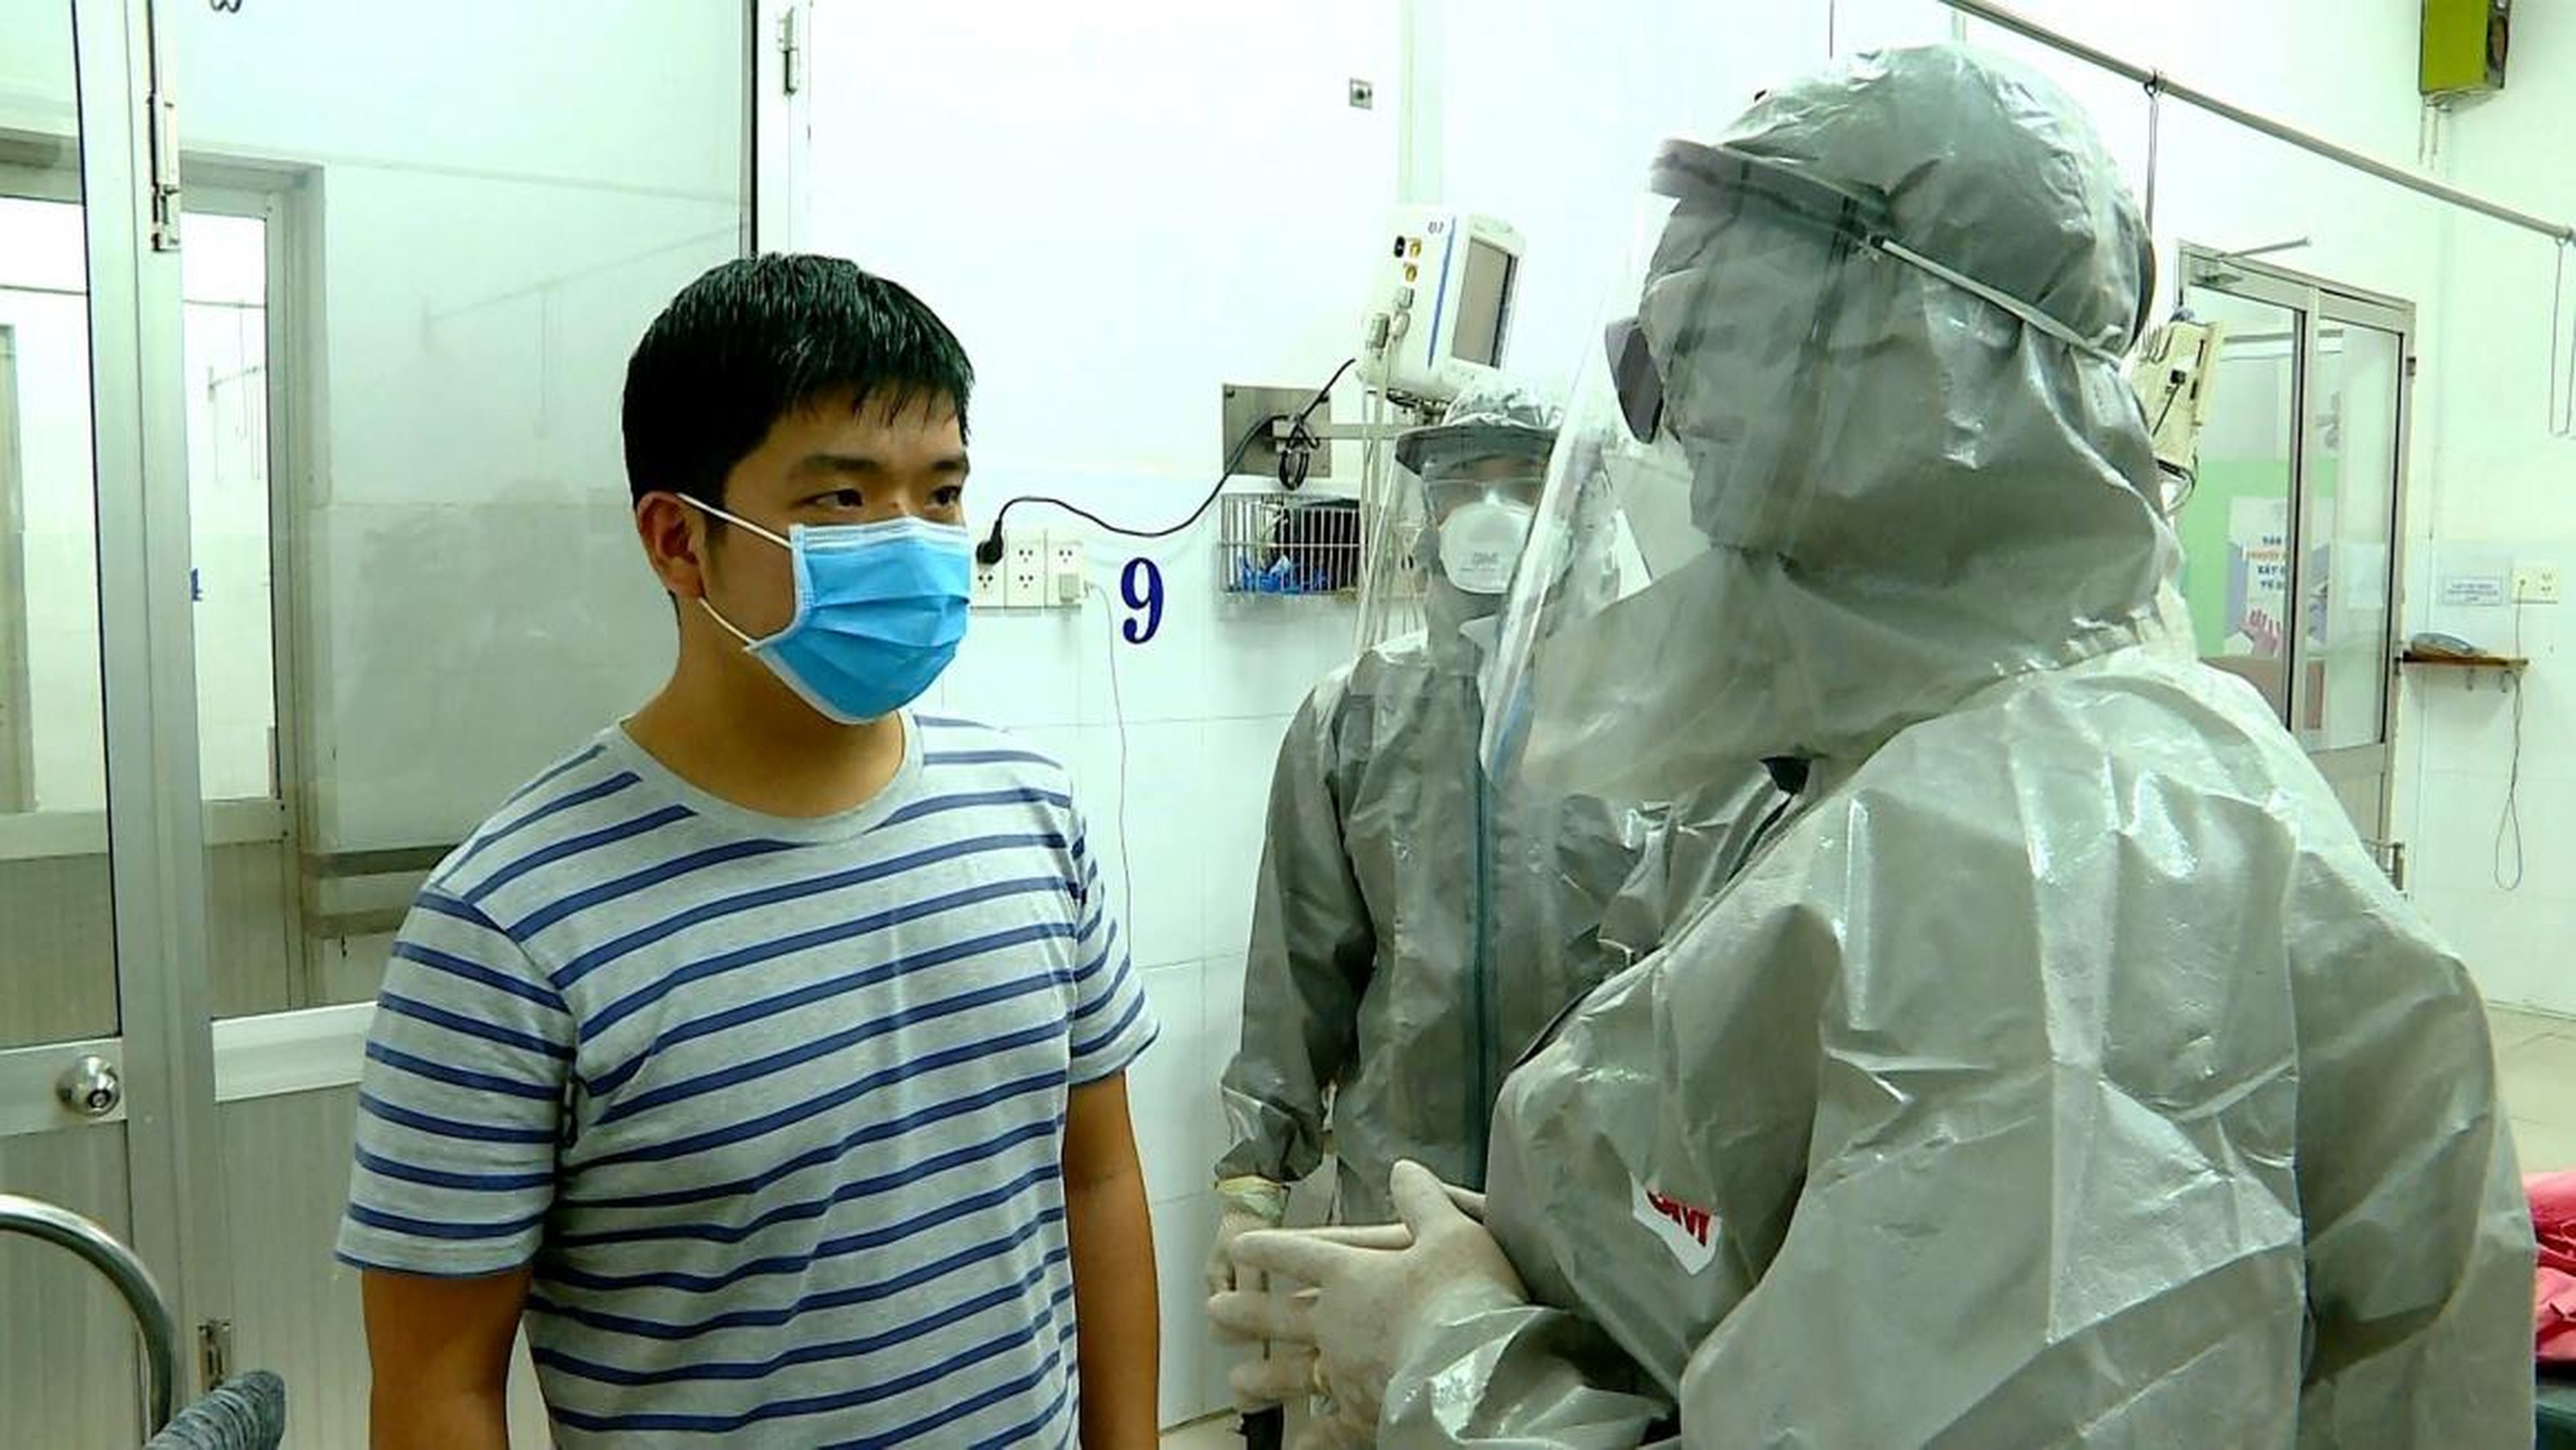 Vietnam's vice minister of health, Nguyen Truong Son, talks with a man at an isolated section of a hospital where two Chinese citizens had tested positive for coronavirus, in Ho Chi Minh city.